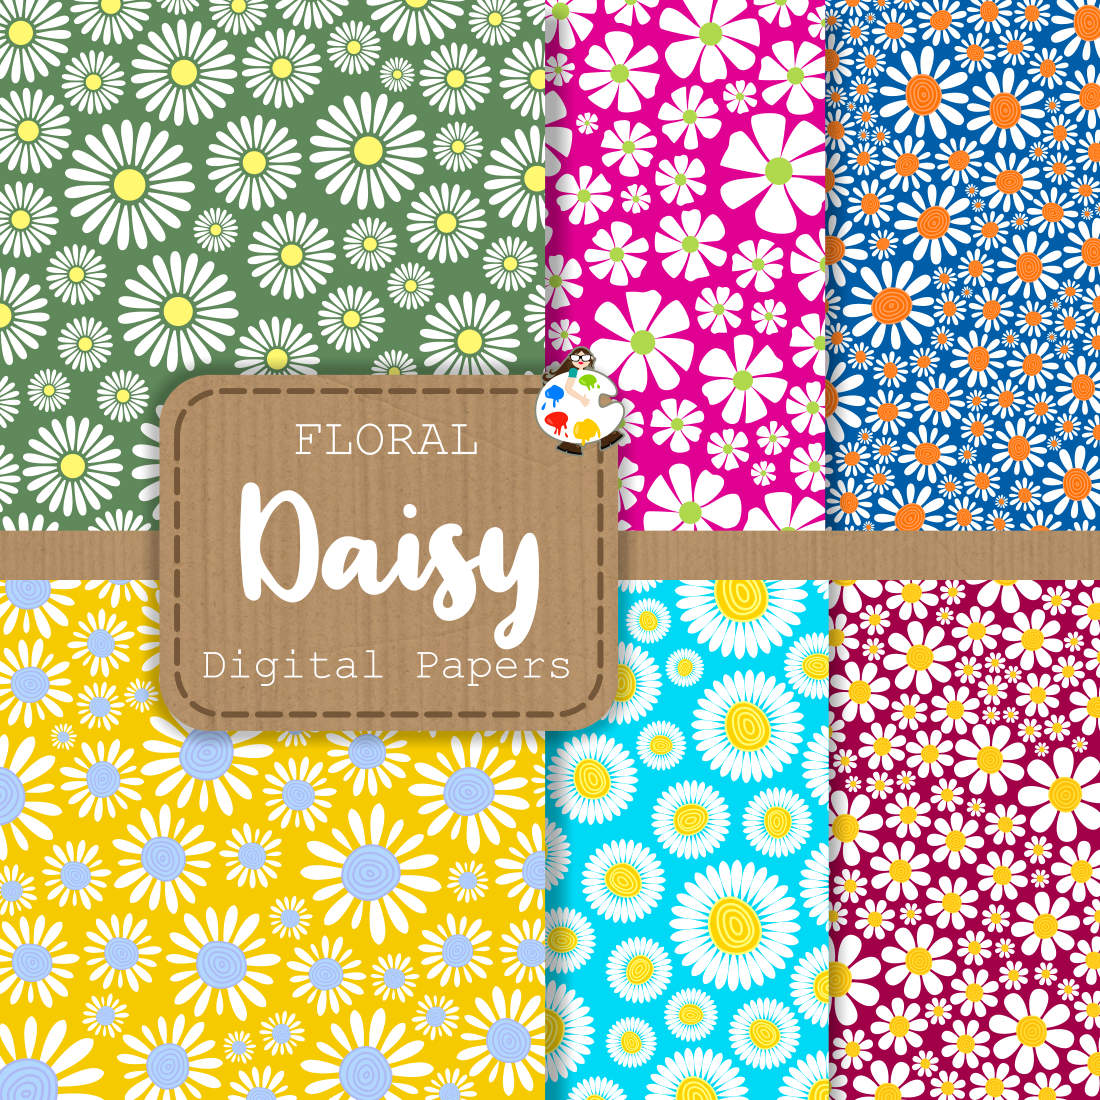 Summer Meadow Daisy Floral Country Patterns cover image.